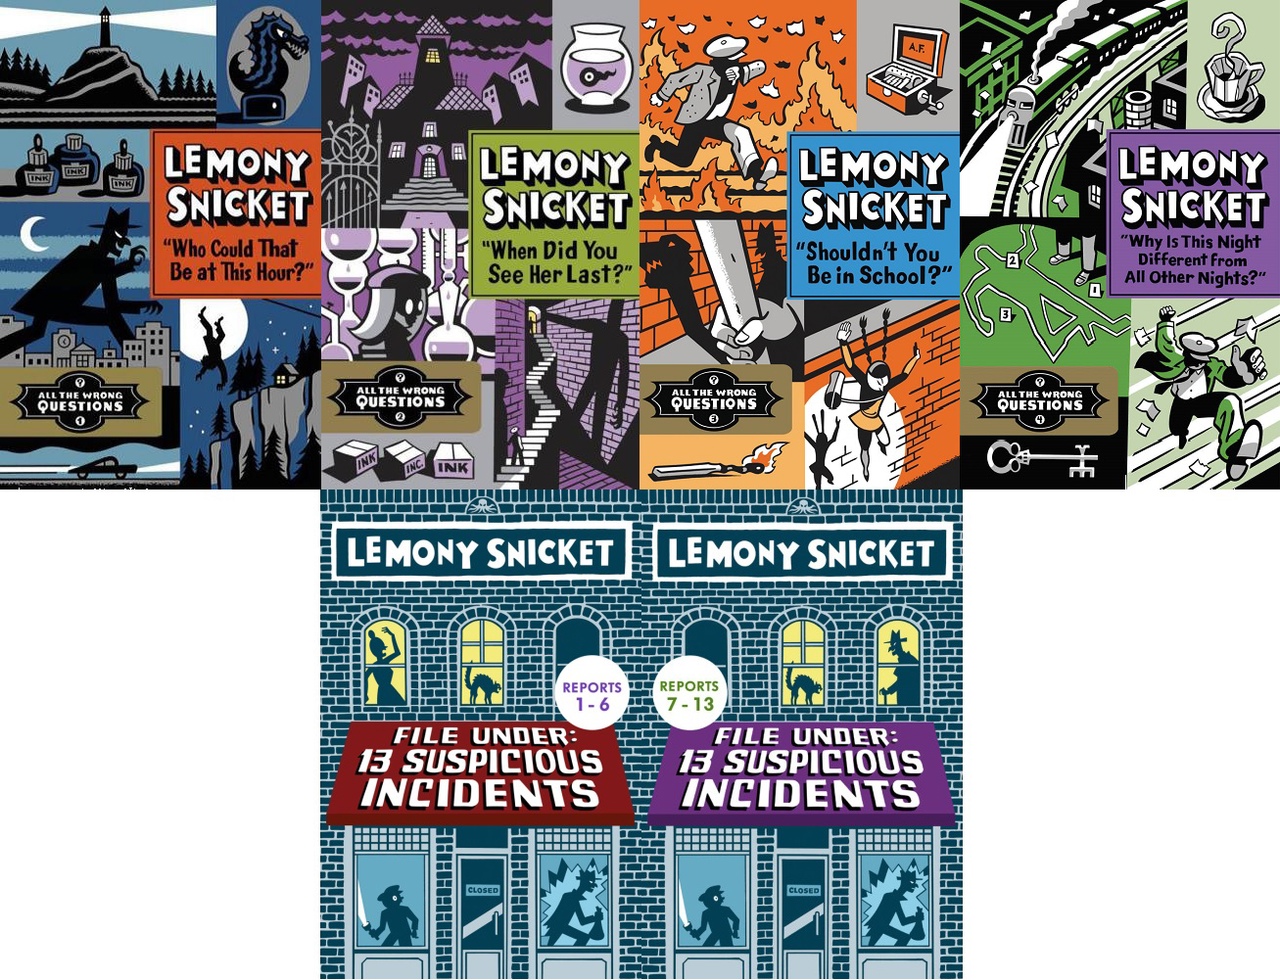 All The Wrong Questions Series By Lemony Snicket